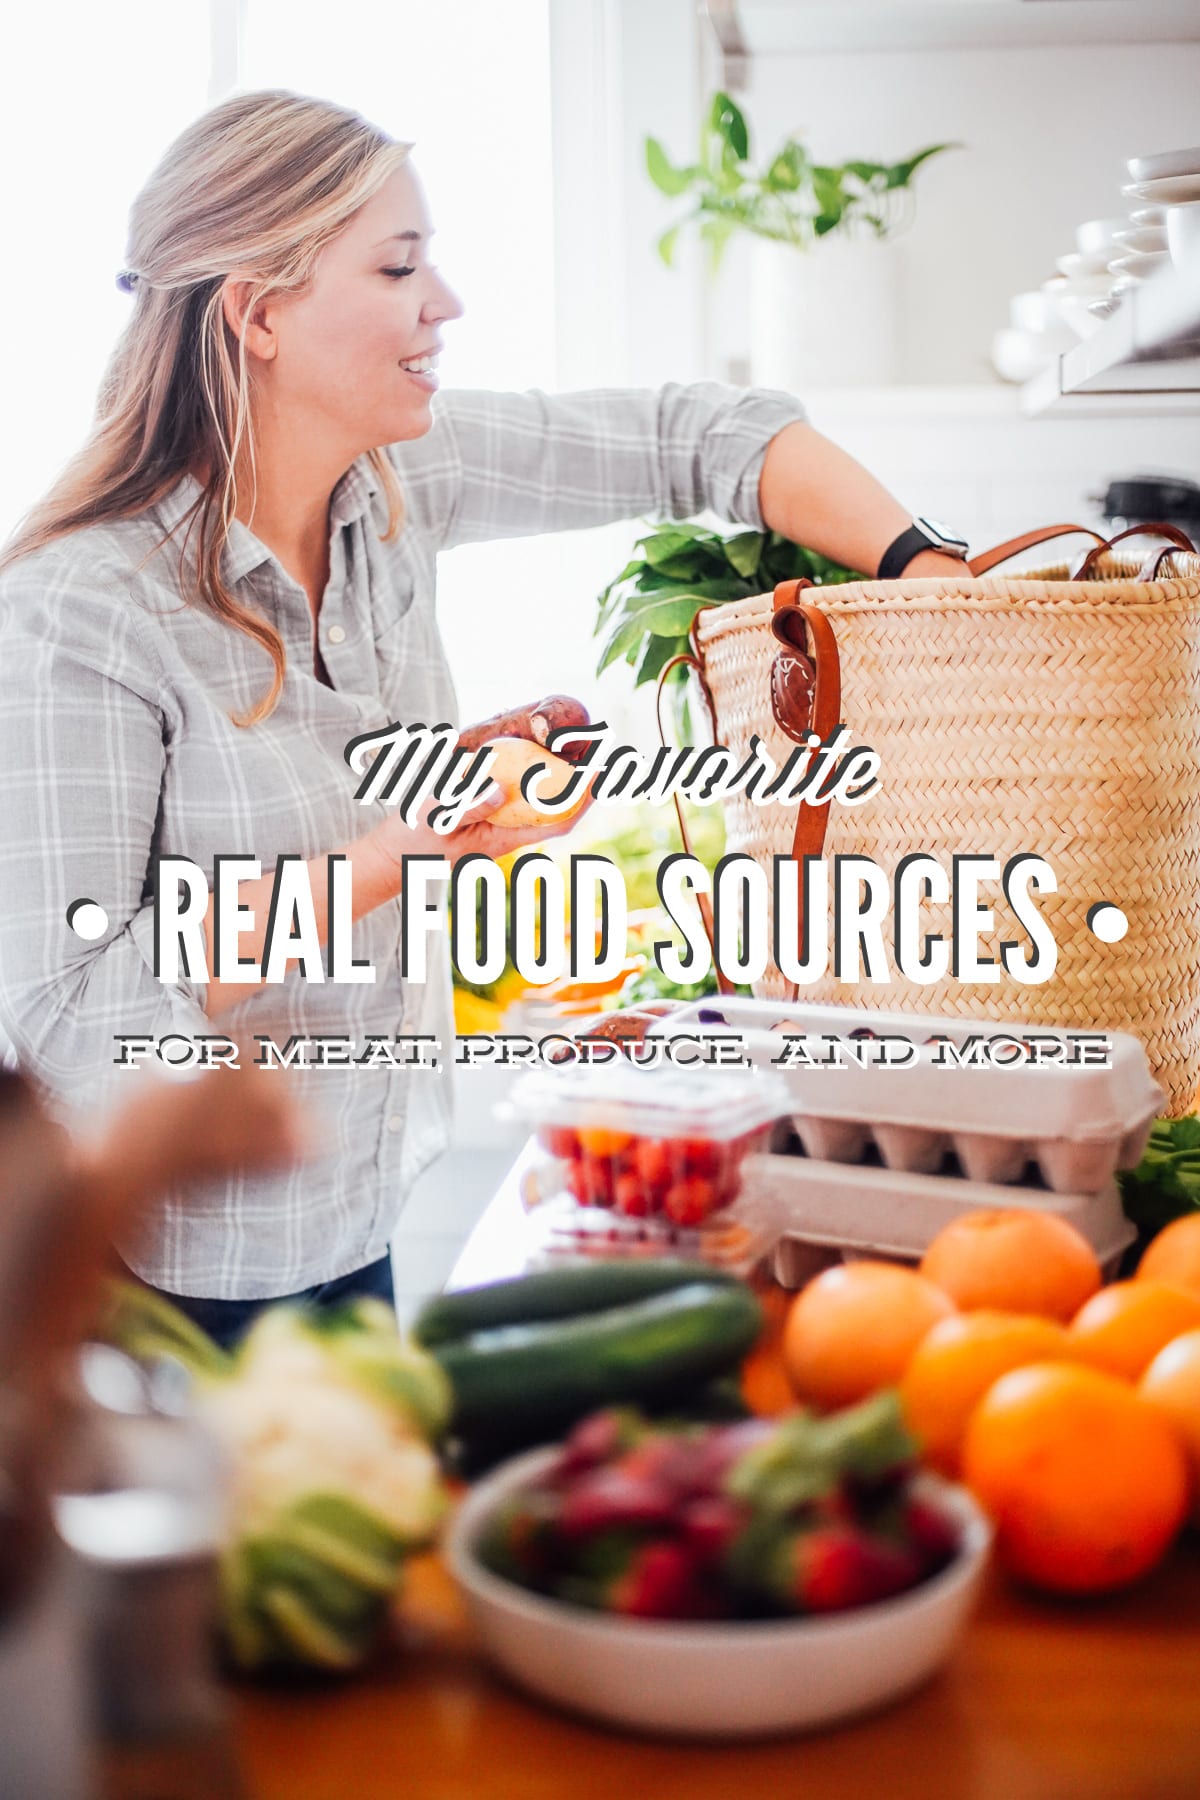 Where to Find Local Real Food